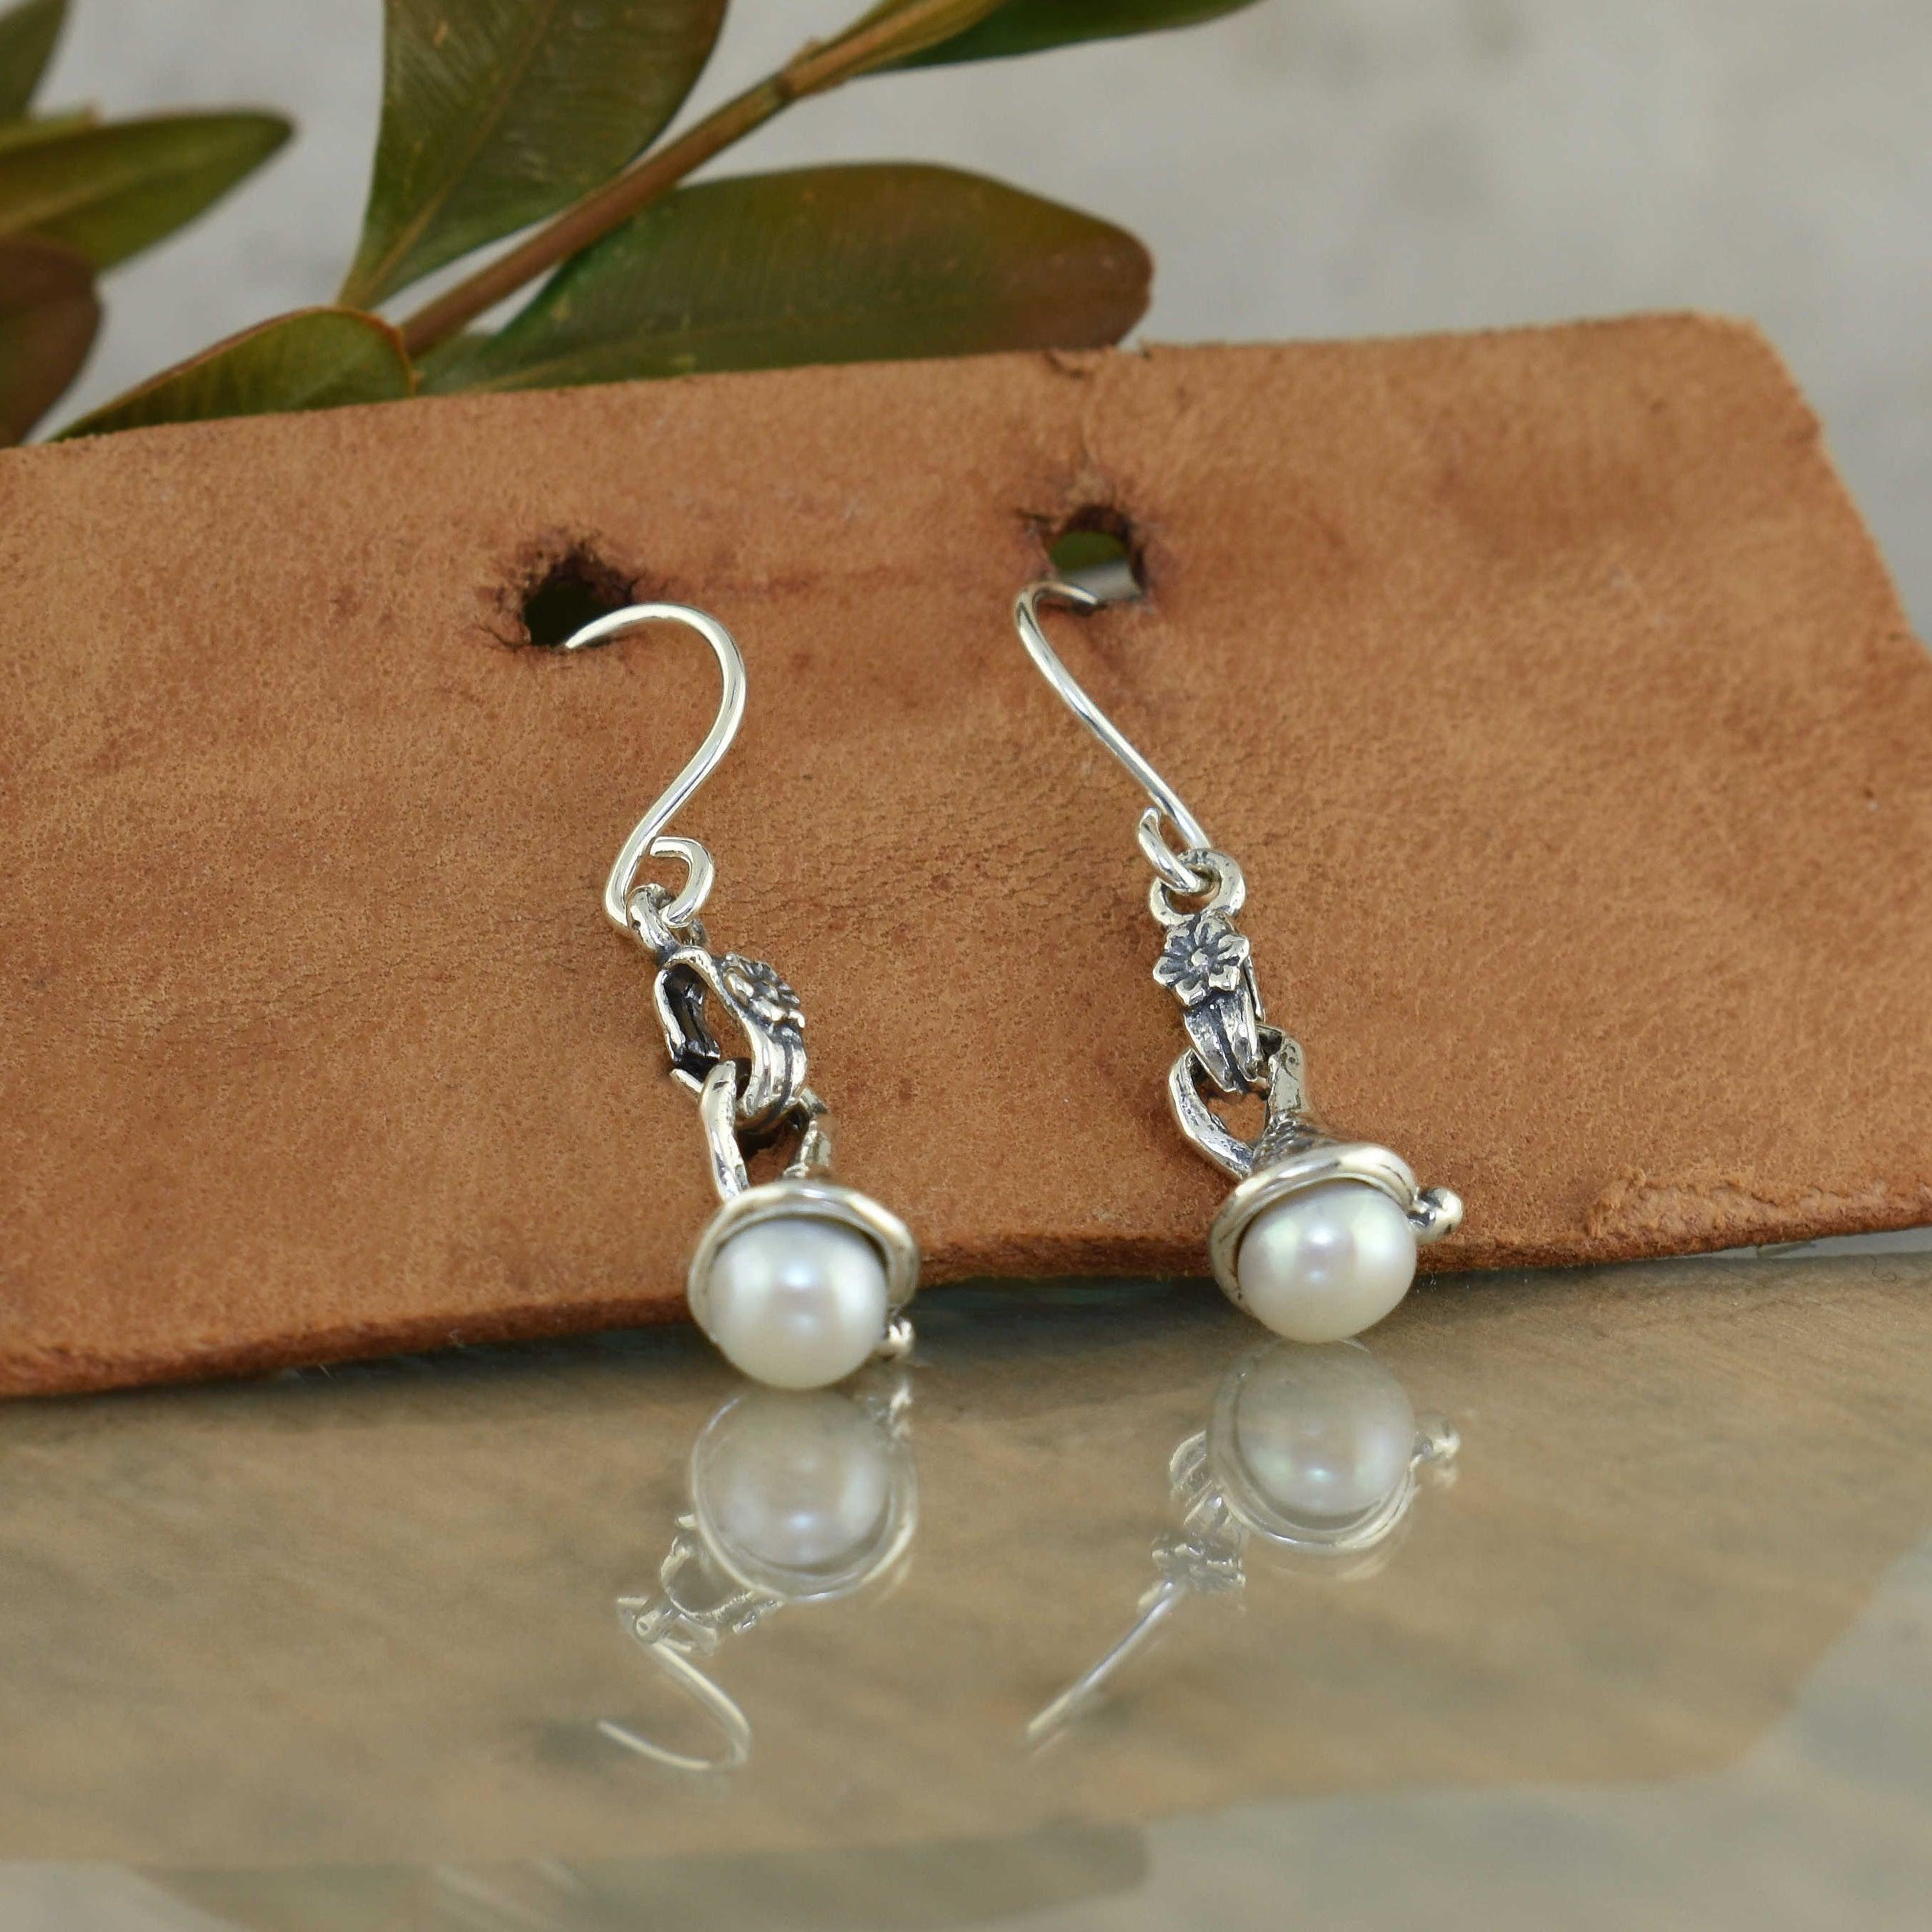 French wire earrings made of sterling silver and pearl